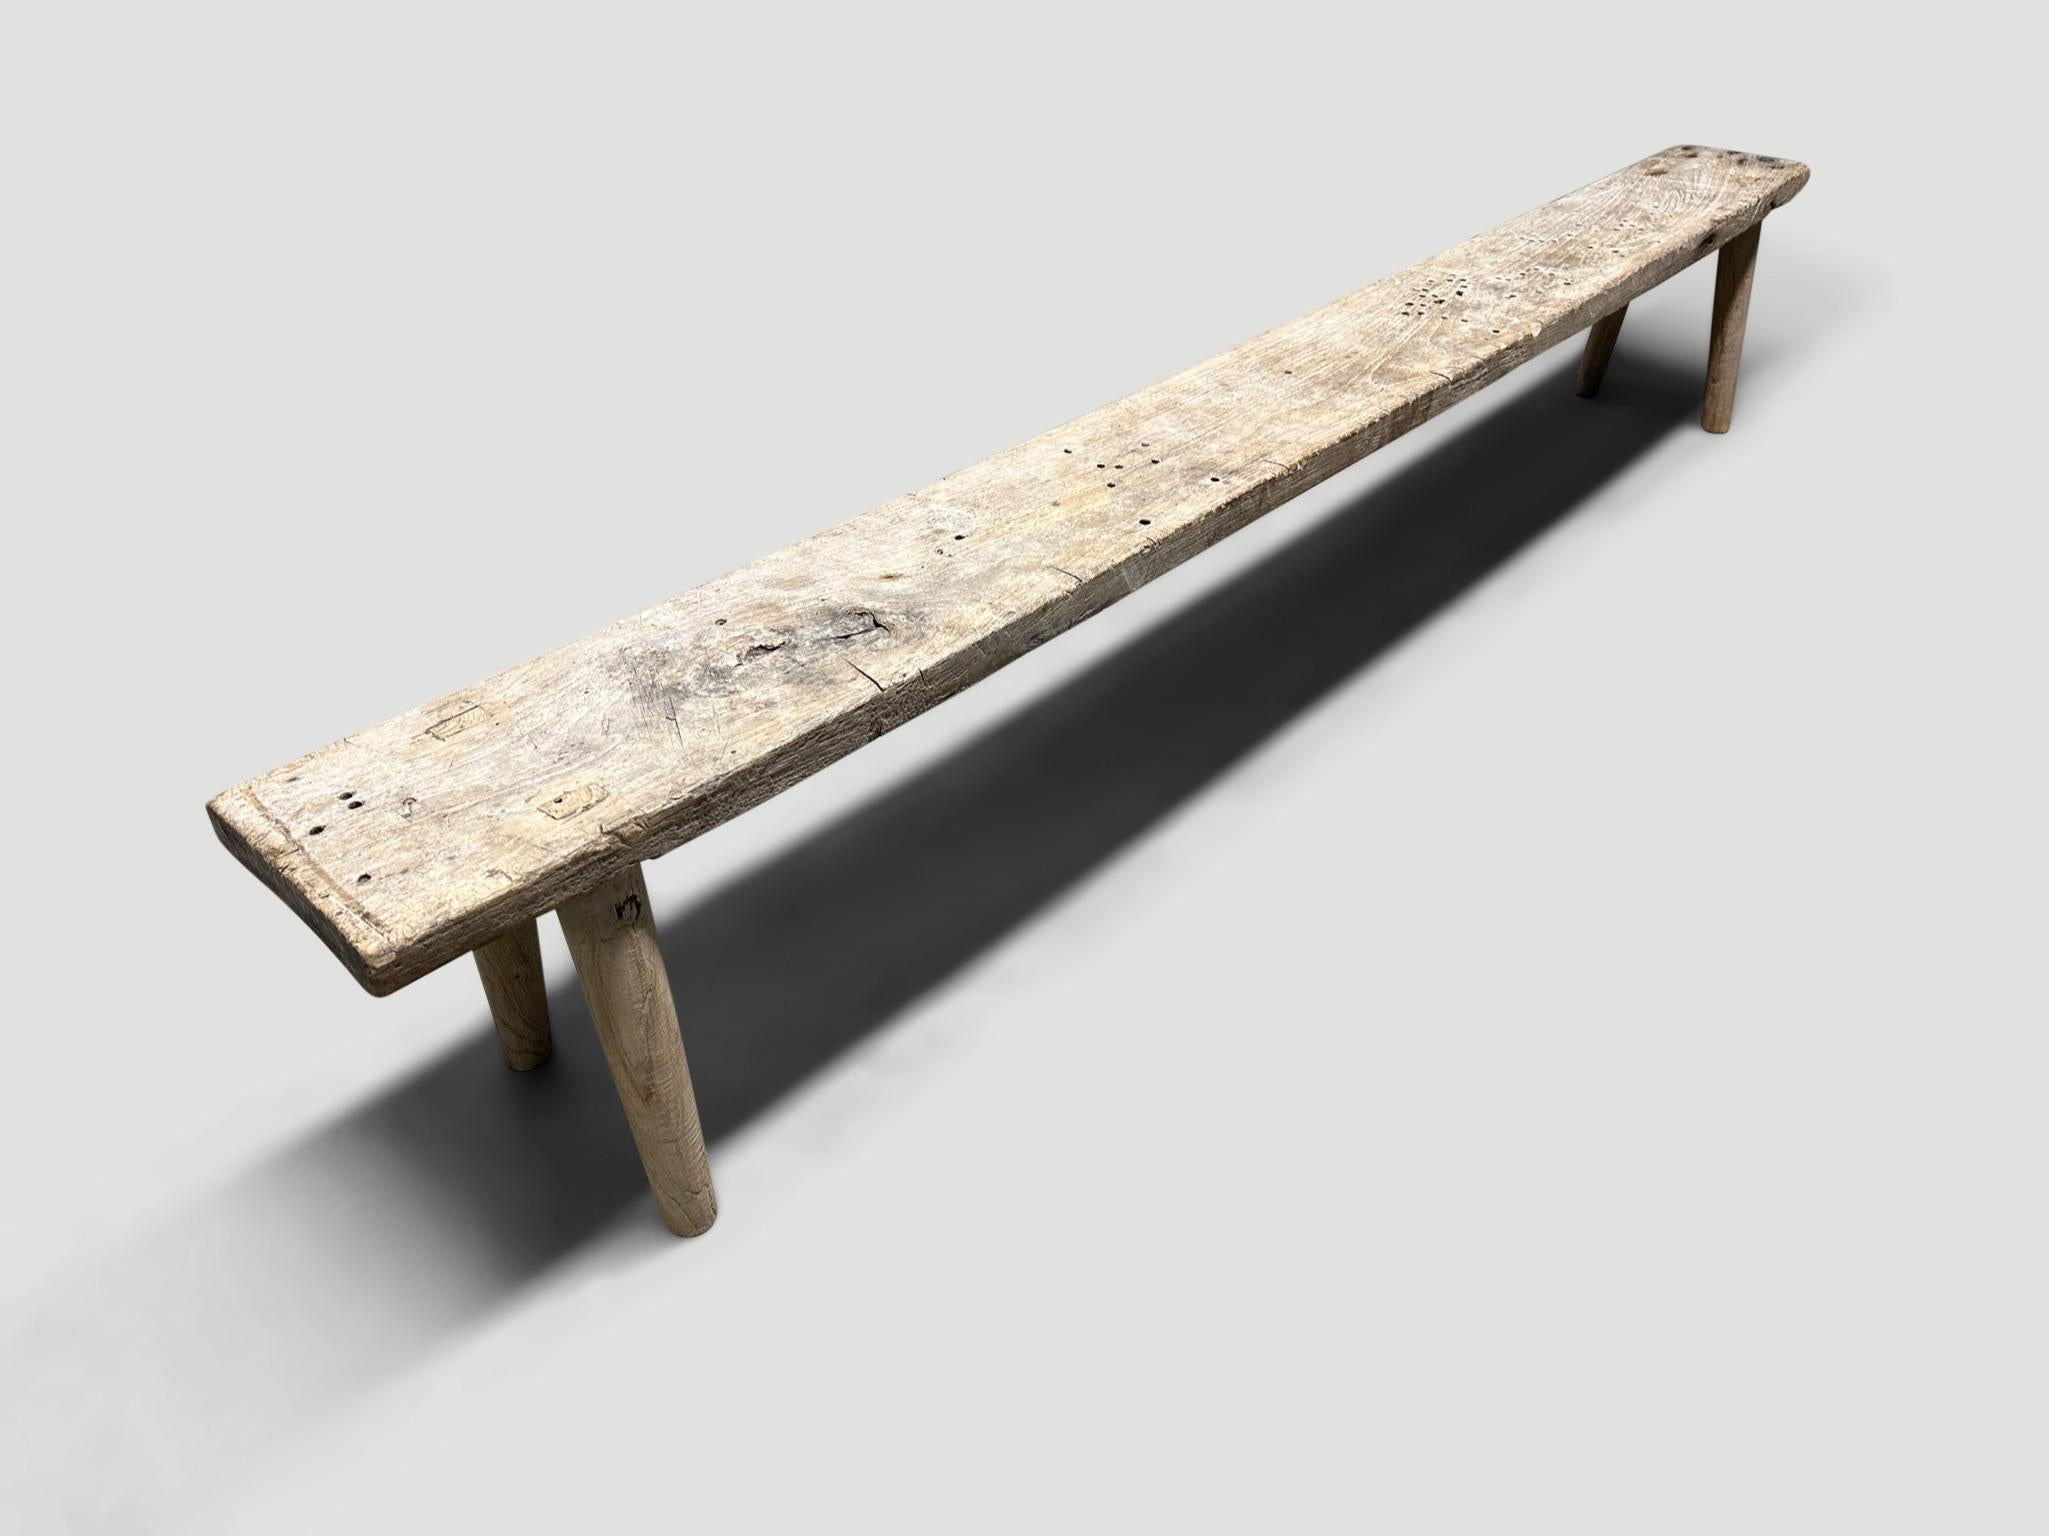 Antique Wabi Sabi teak bench celebrating the cracks and crevices and all the other marks that time and loving use have left behind. We added smooth teak minimalist legs to this antique thick slab. It’s all in the details.

This bench was handmade in